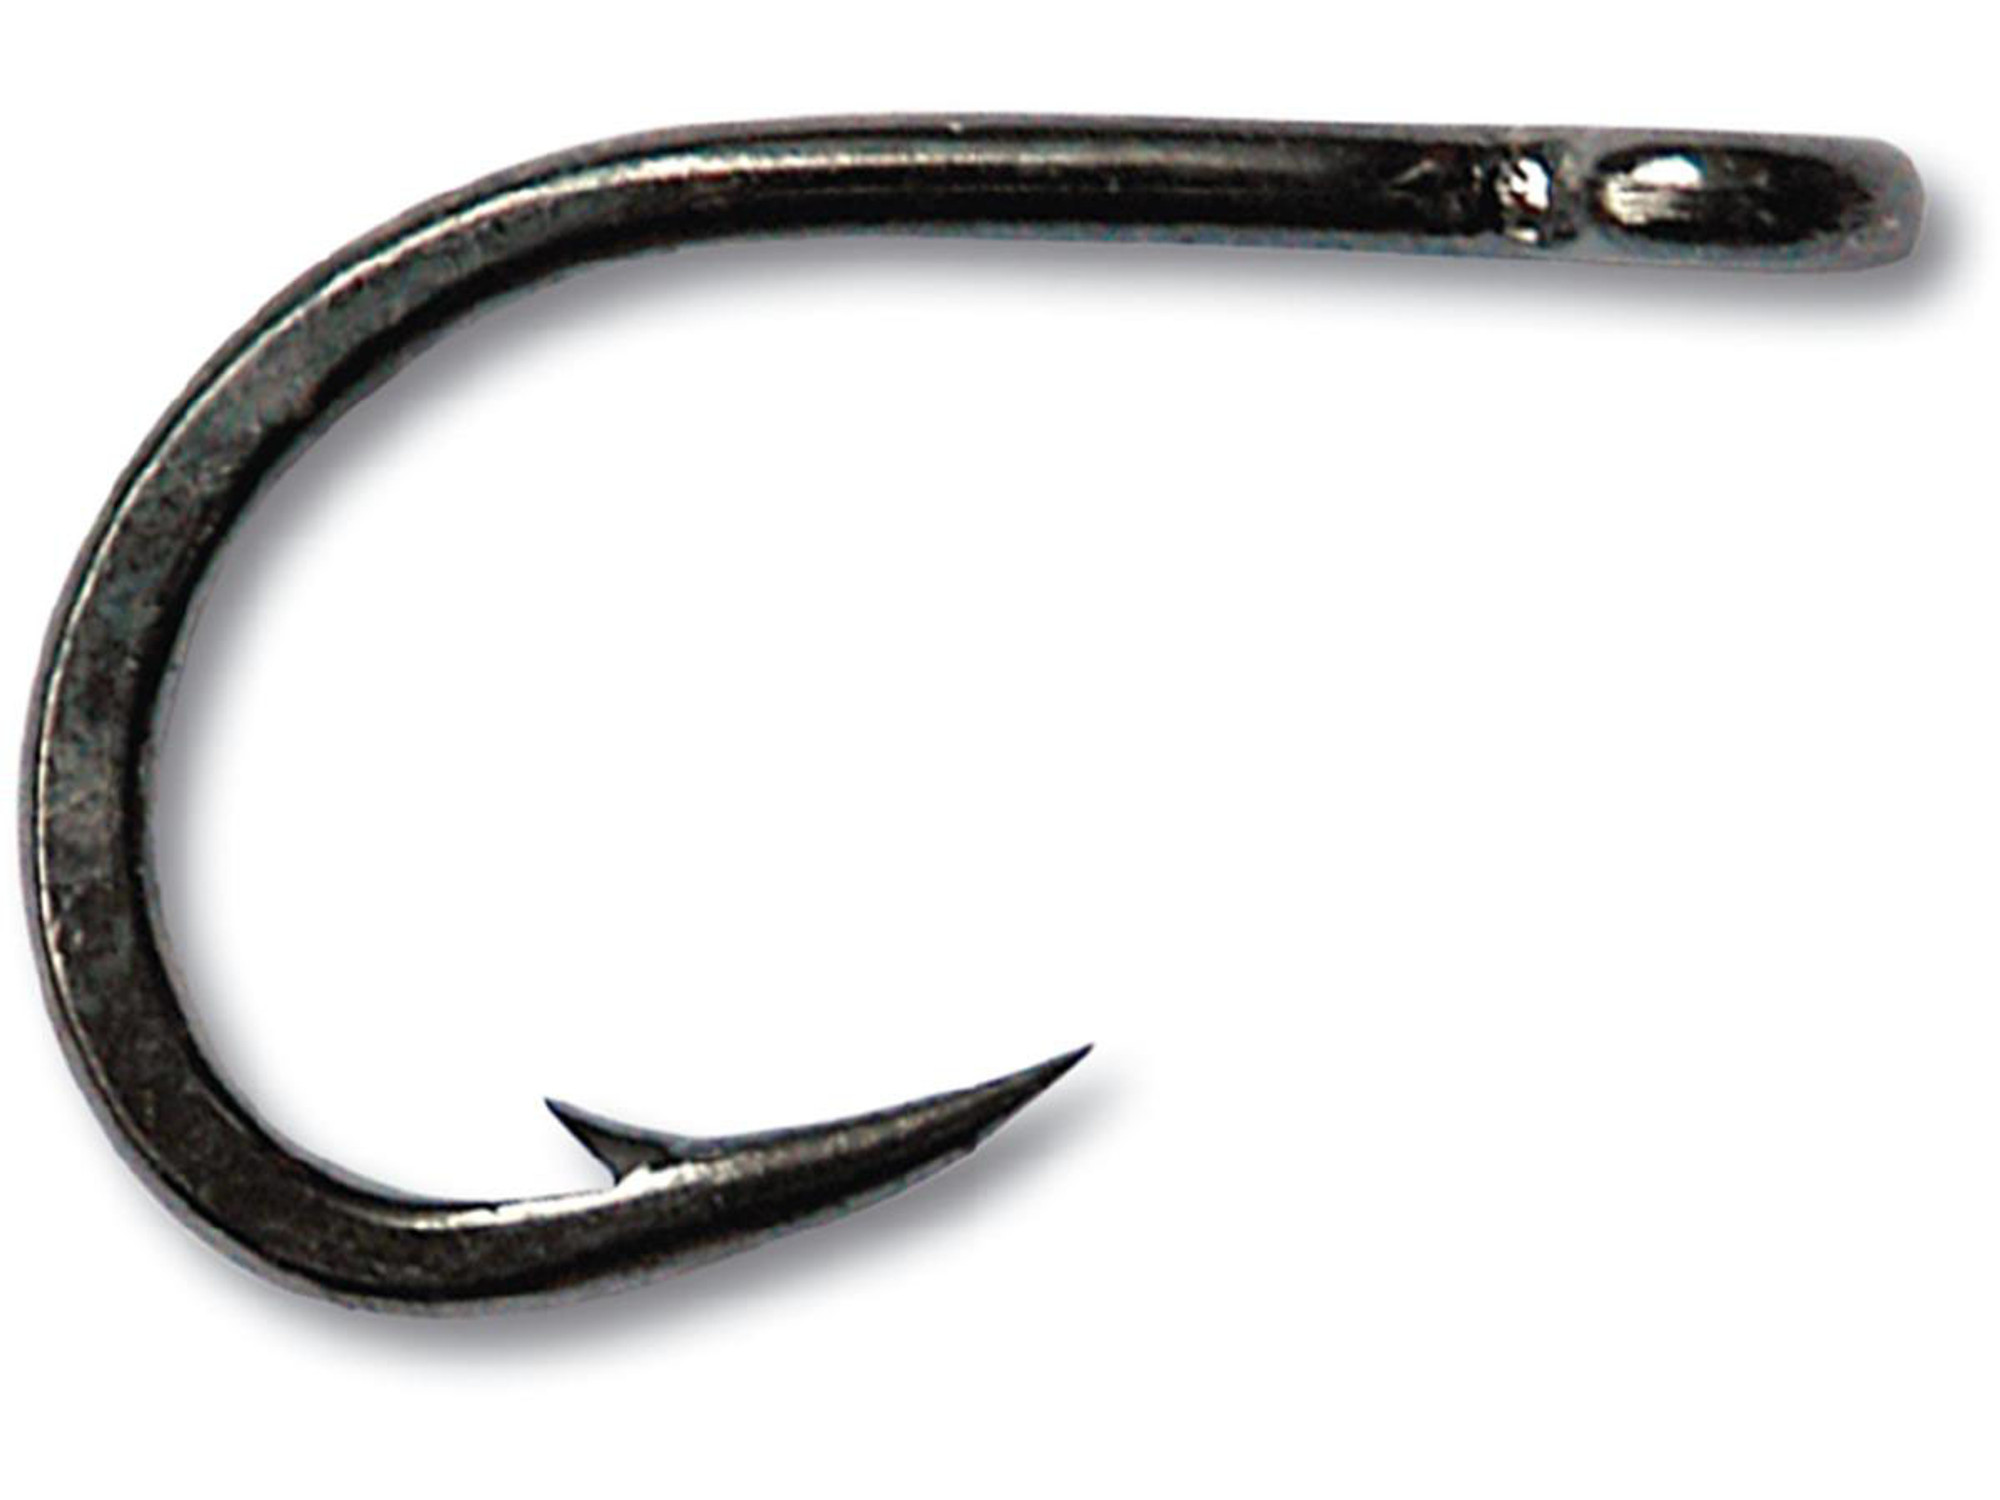 Mustad Hoodlum Bait Hook Forged 4X Strong (Size: 1/0 Set of 5)